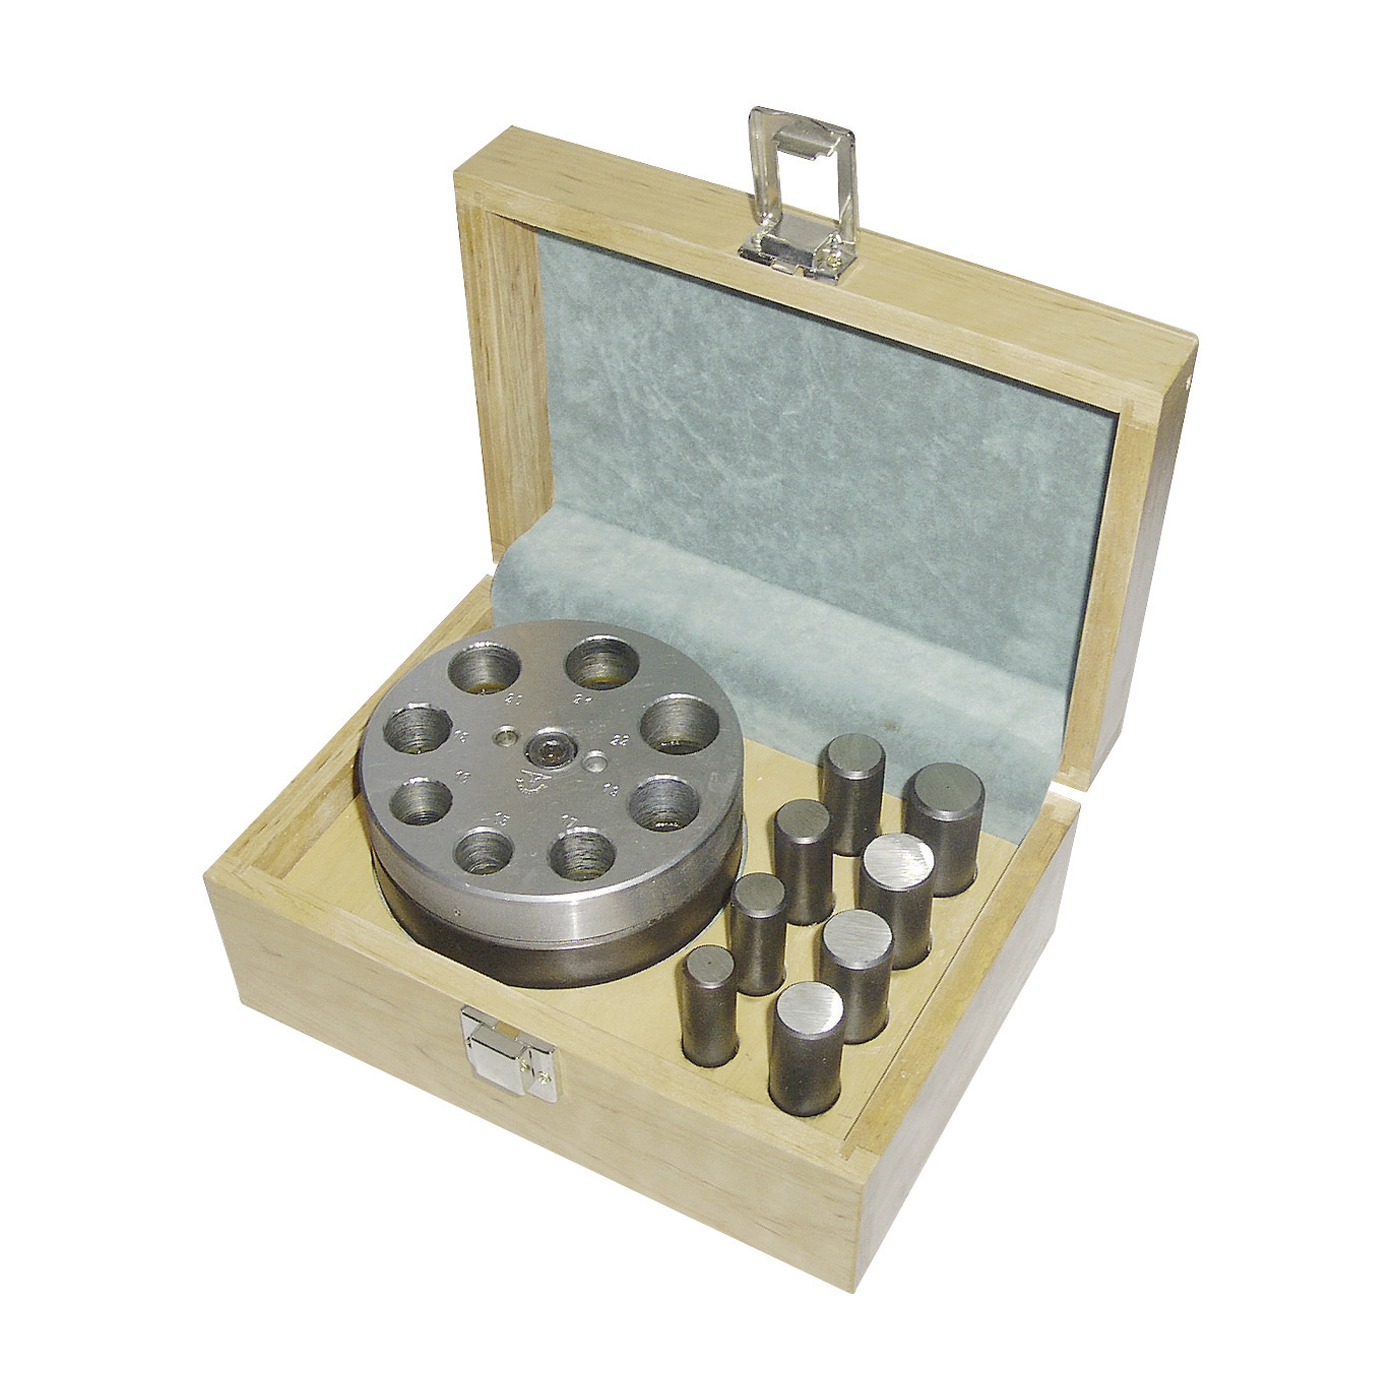 Hollow Punch Assortment, with 8 Punches, ø 15 - 22 mm - 1 set